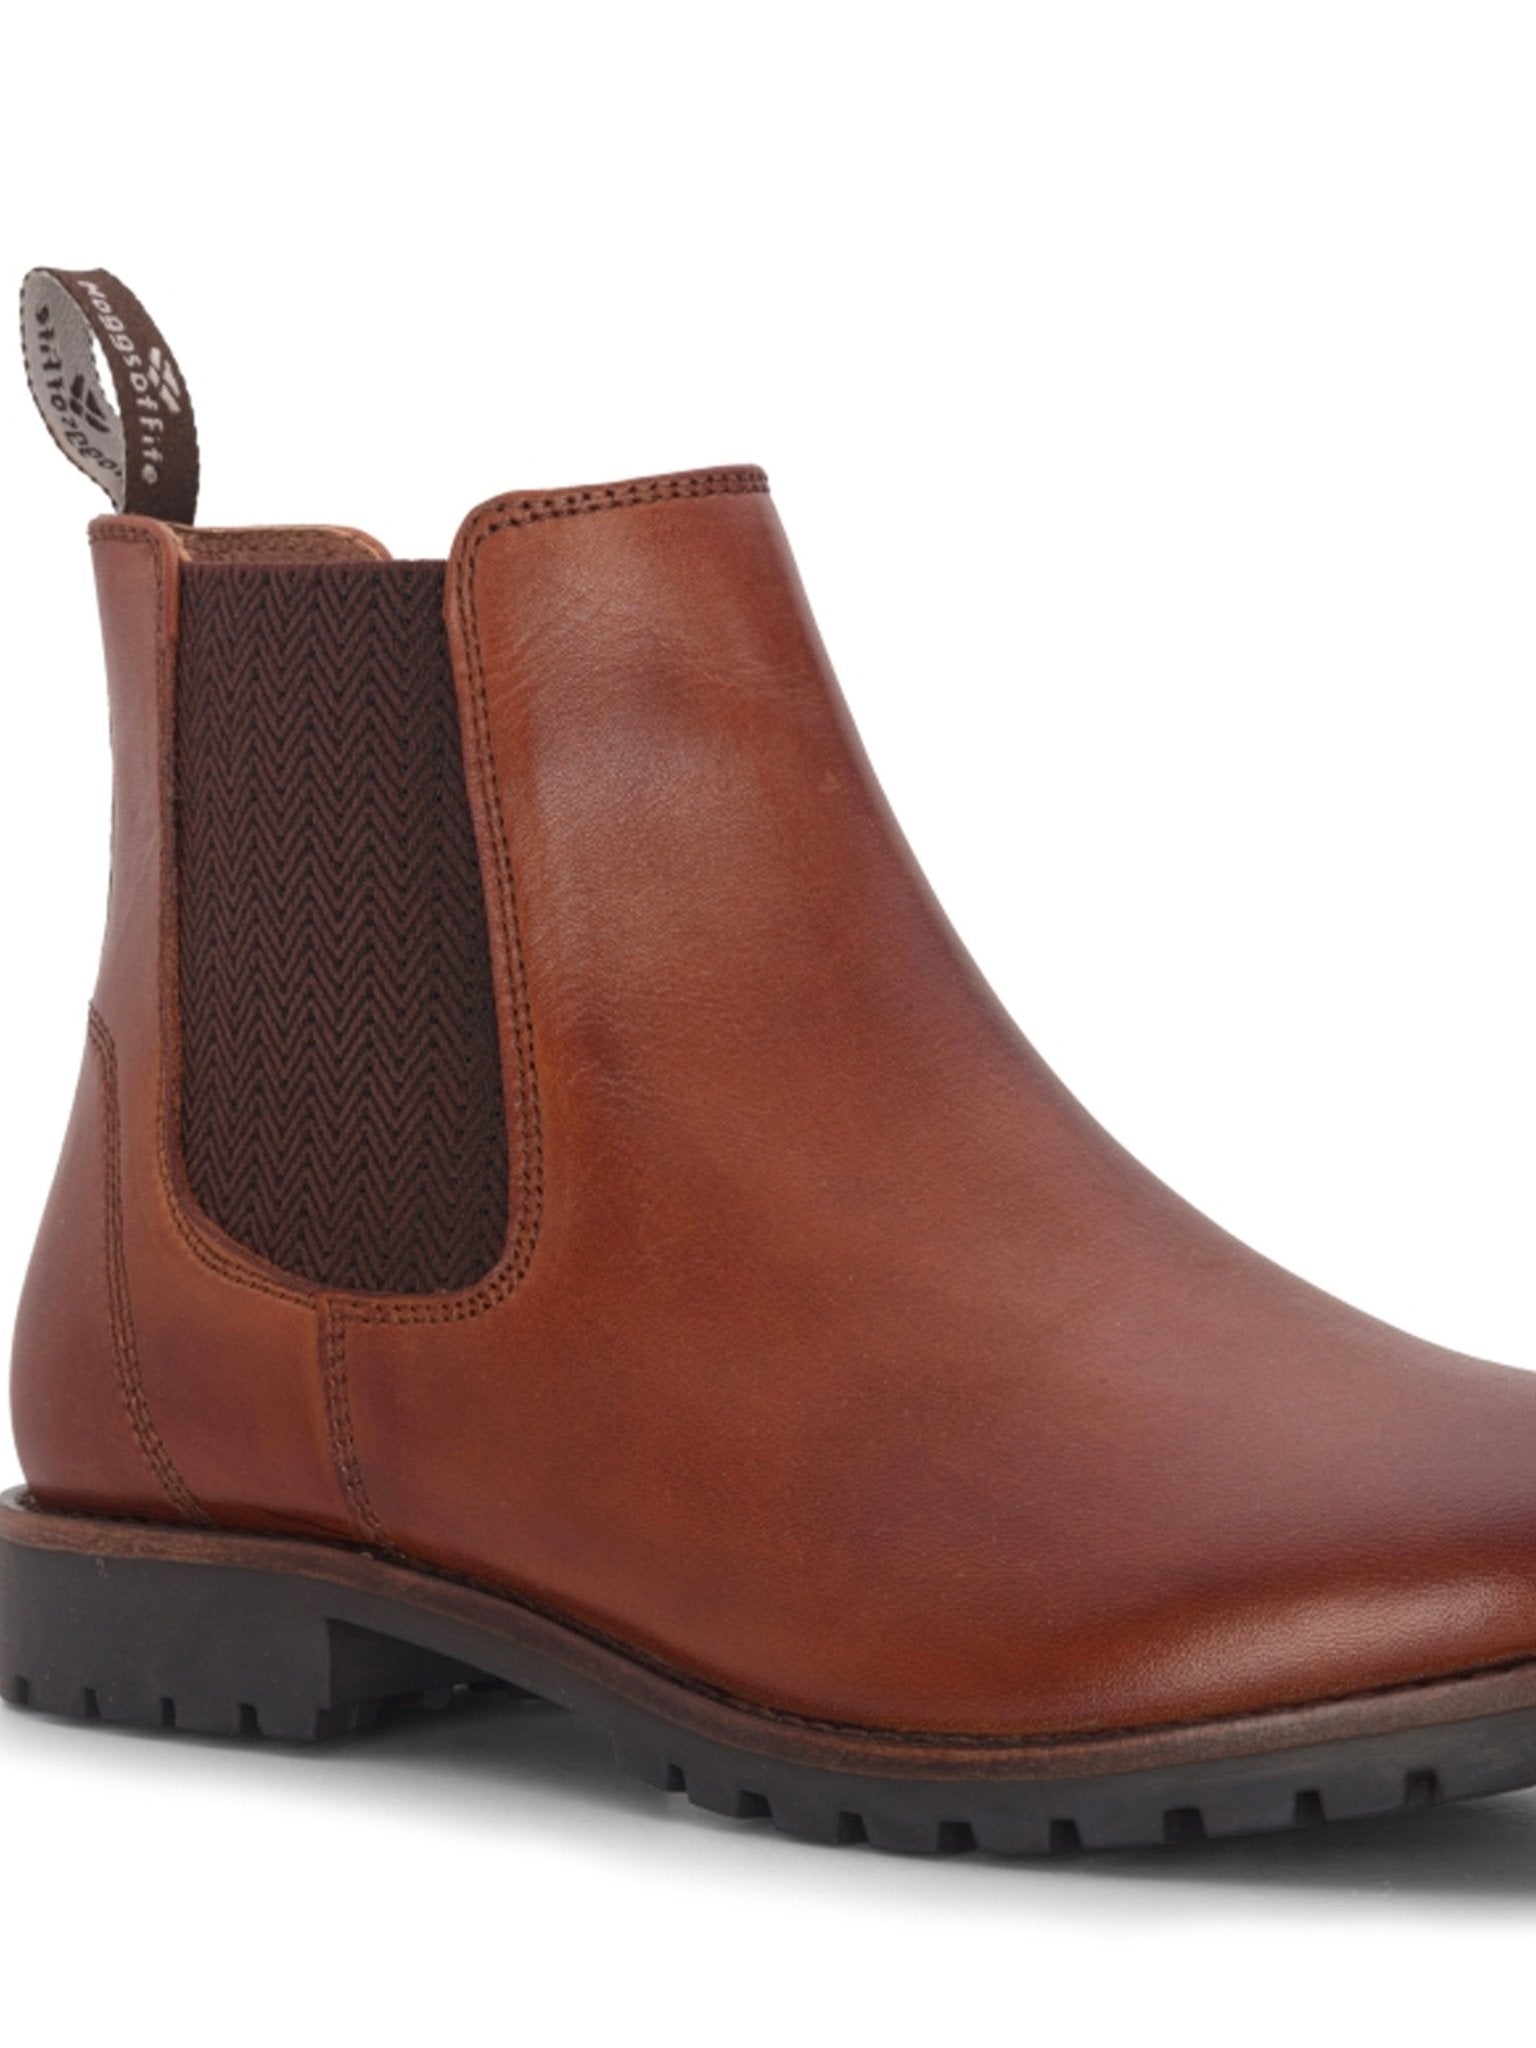 4elementsclothingHoggs of FifeHoggs of Fife - Ladies Boot / Classic Jodhpur Dealer / Chelsea BootBoots1079/TN/36